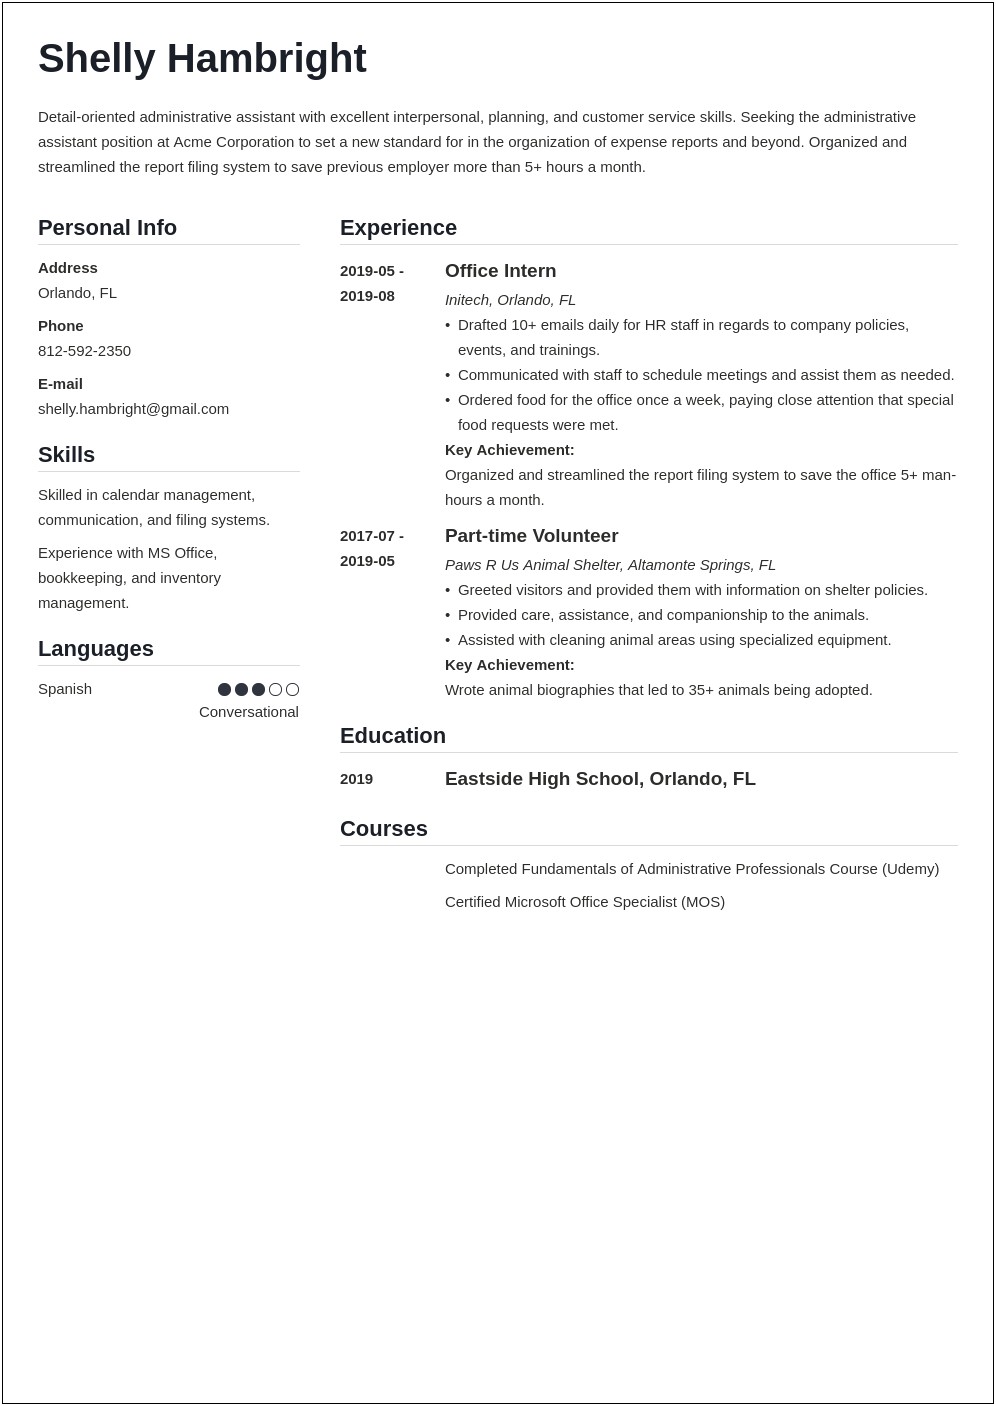 Examples Of Administrative Assistant Resume Objectives